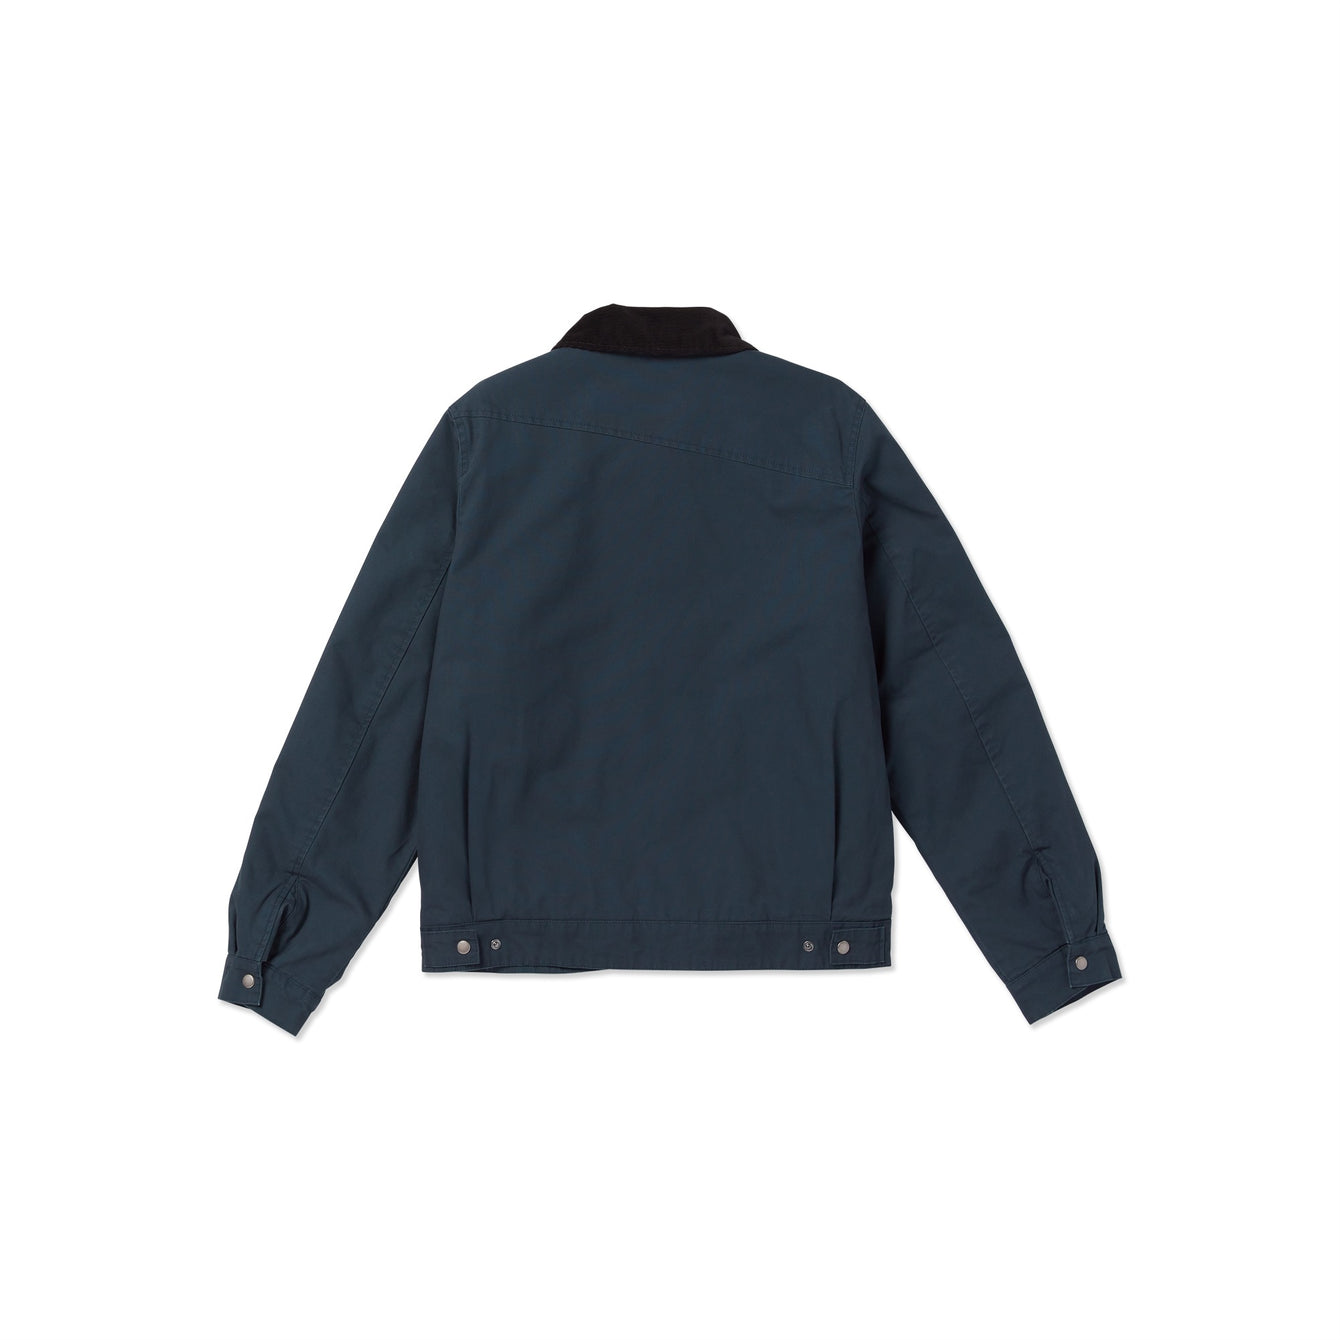 VOIDER LINED JACKET - NAVY